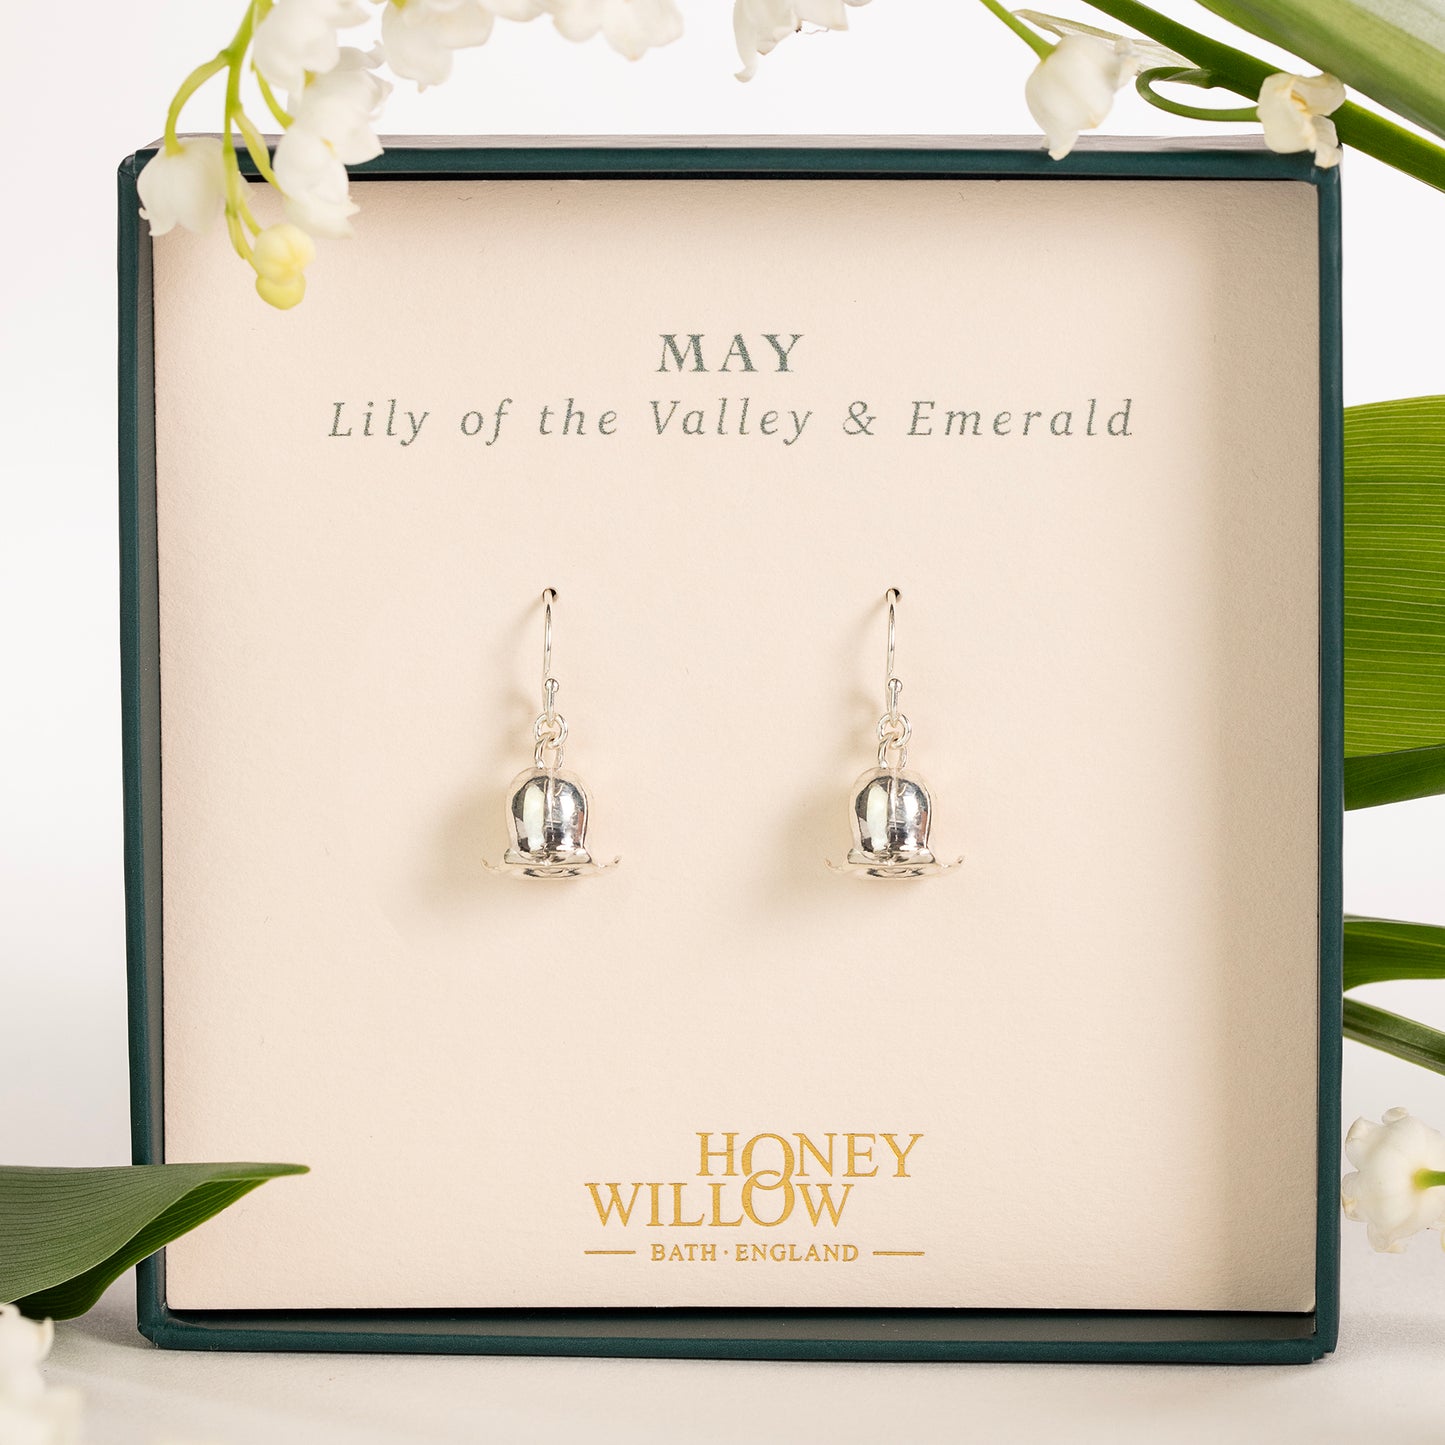 May Birth Flower & Birth Stone Earrings - Lily of the Valley & Emerald  - Silver